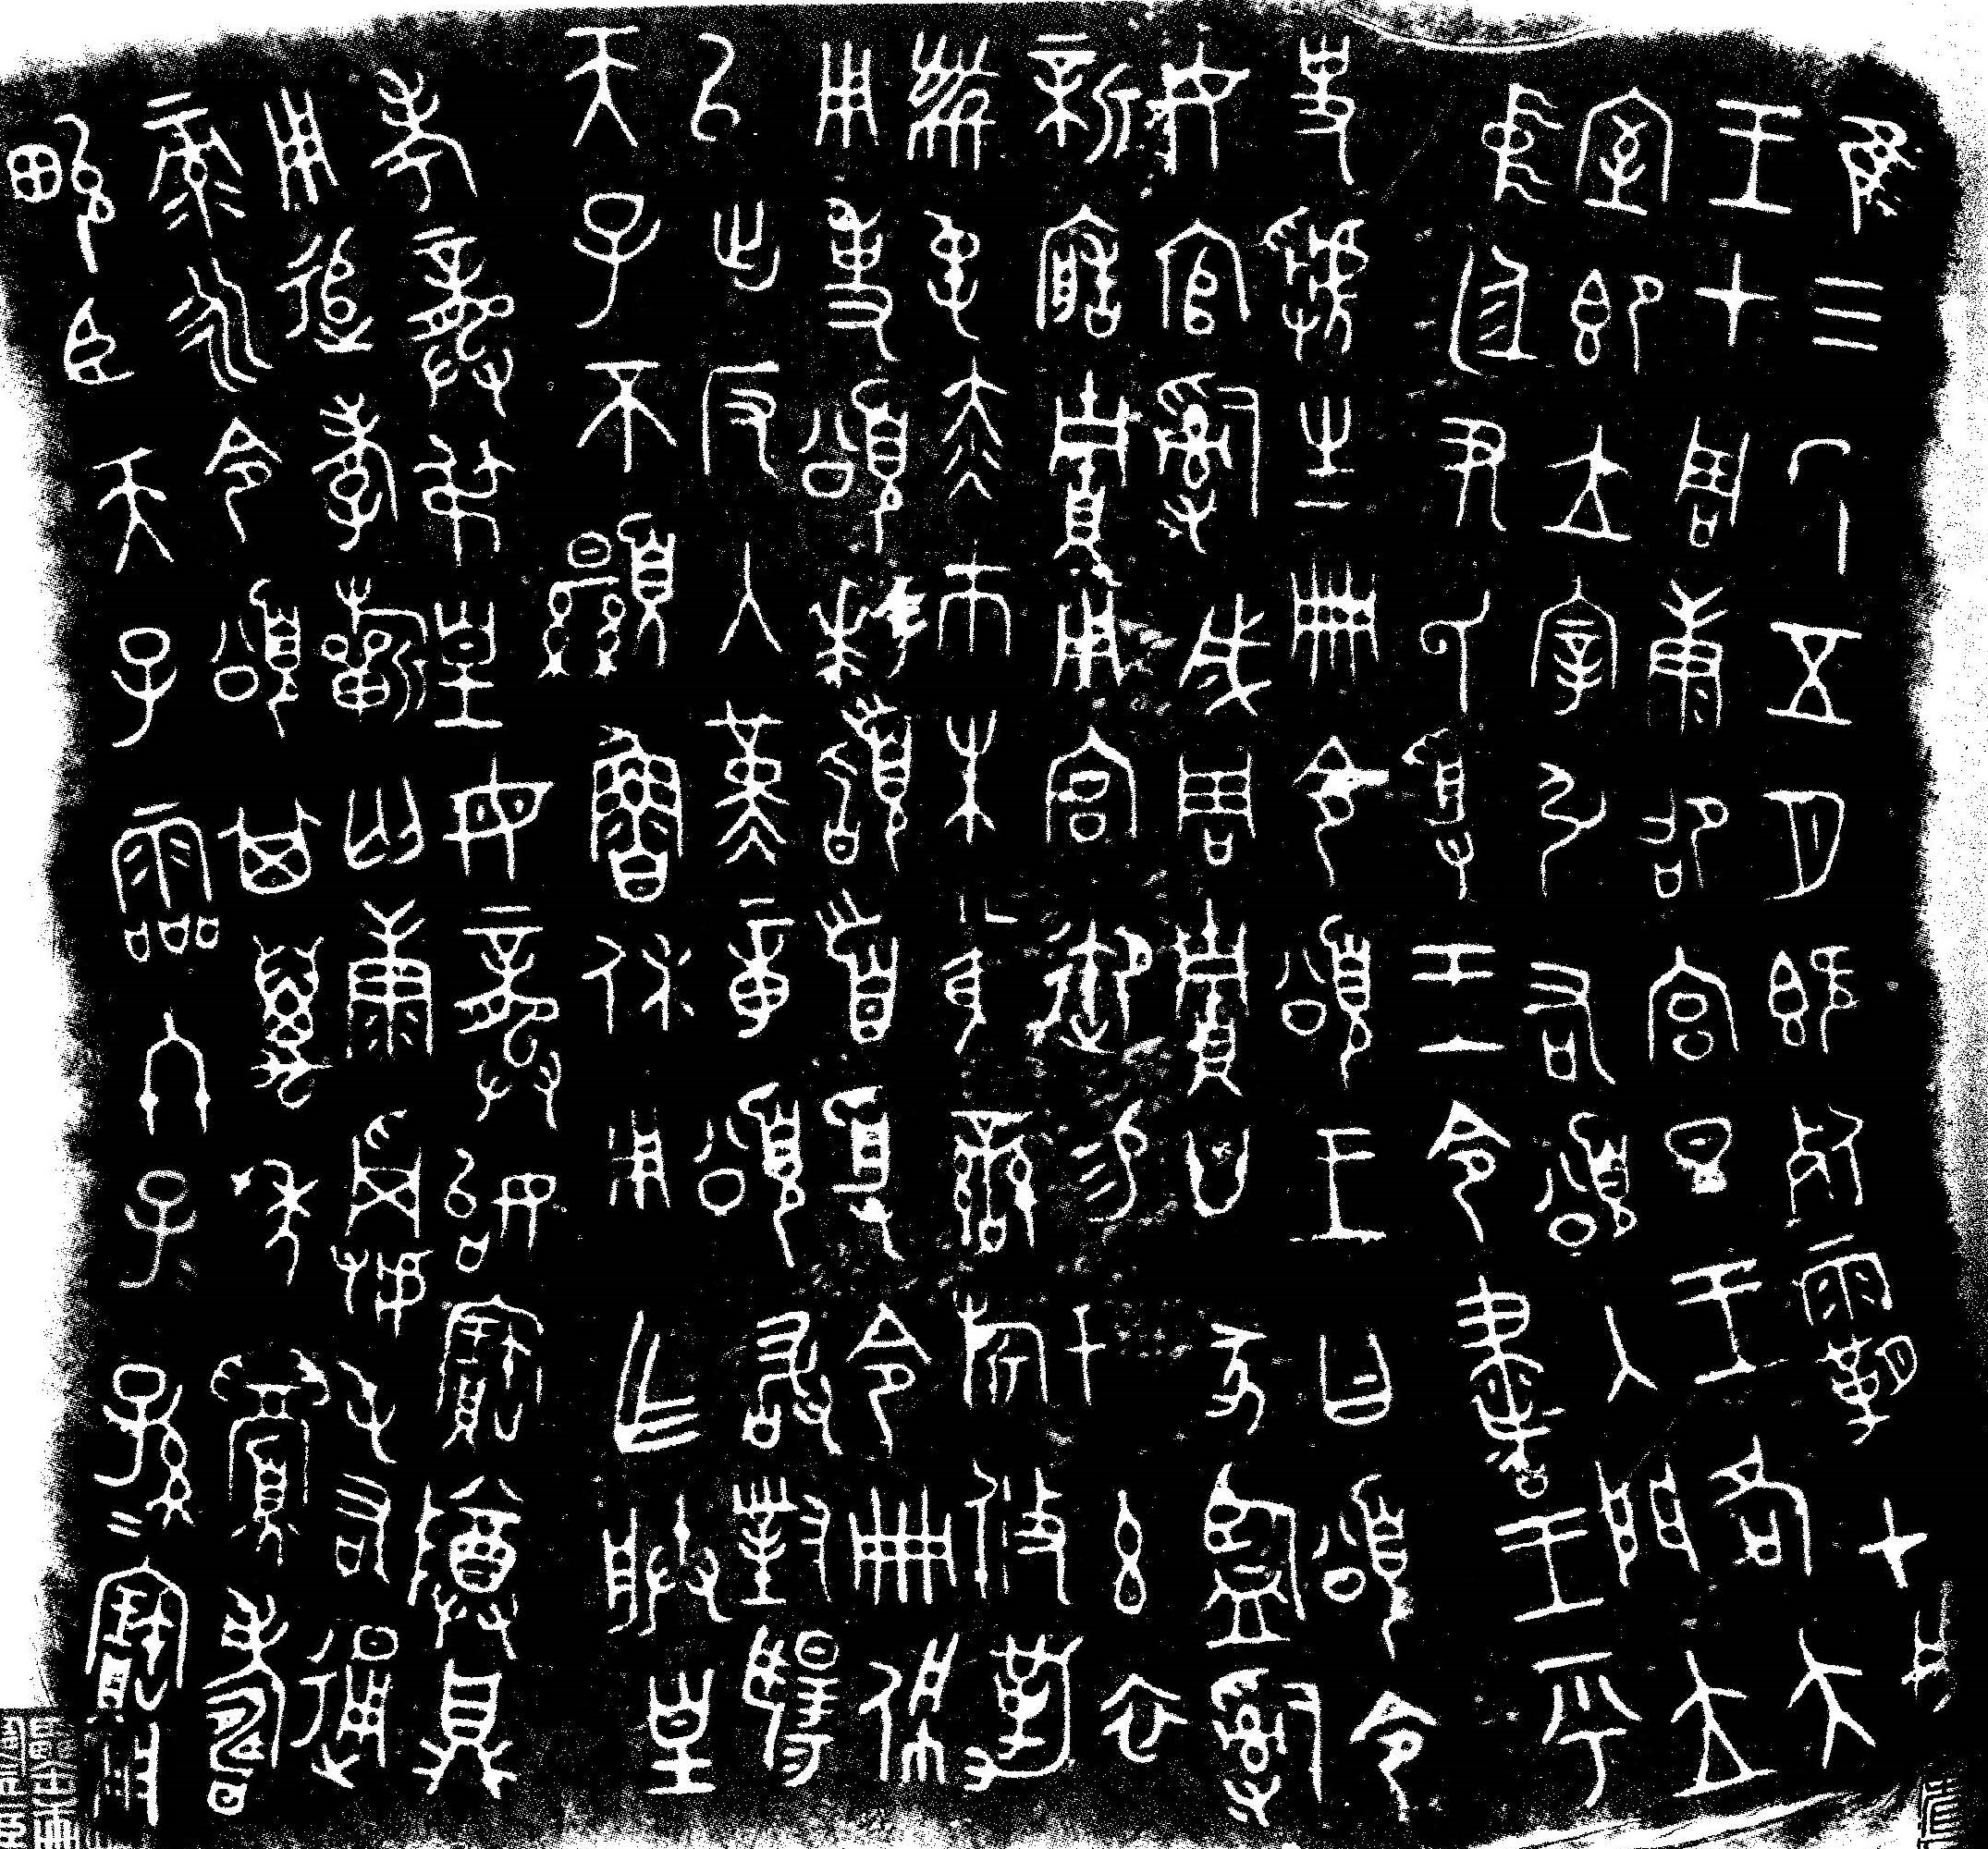 Shen ancient Chinese script in bronze 2000 BC